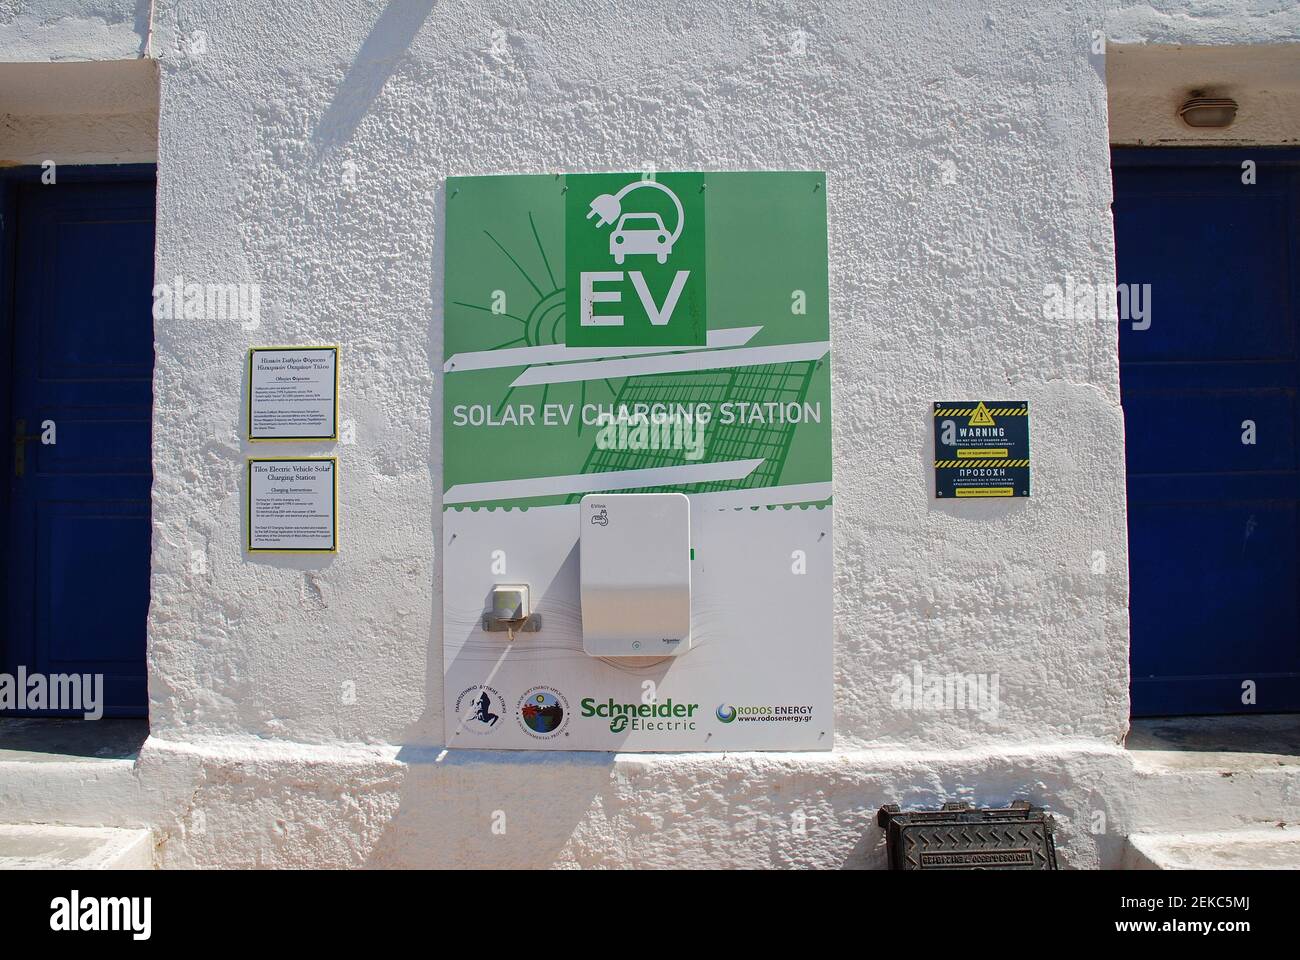 A solar powered electric vehicle charging point at Livadia on the Greek island of Tilos on June 15, 2019. Stock Photo